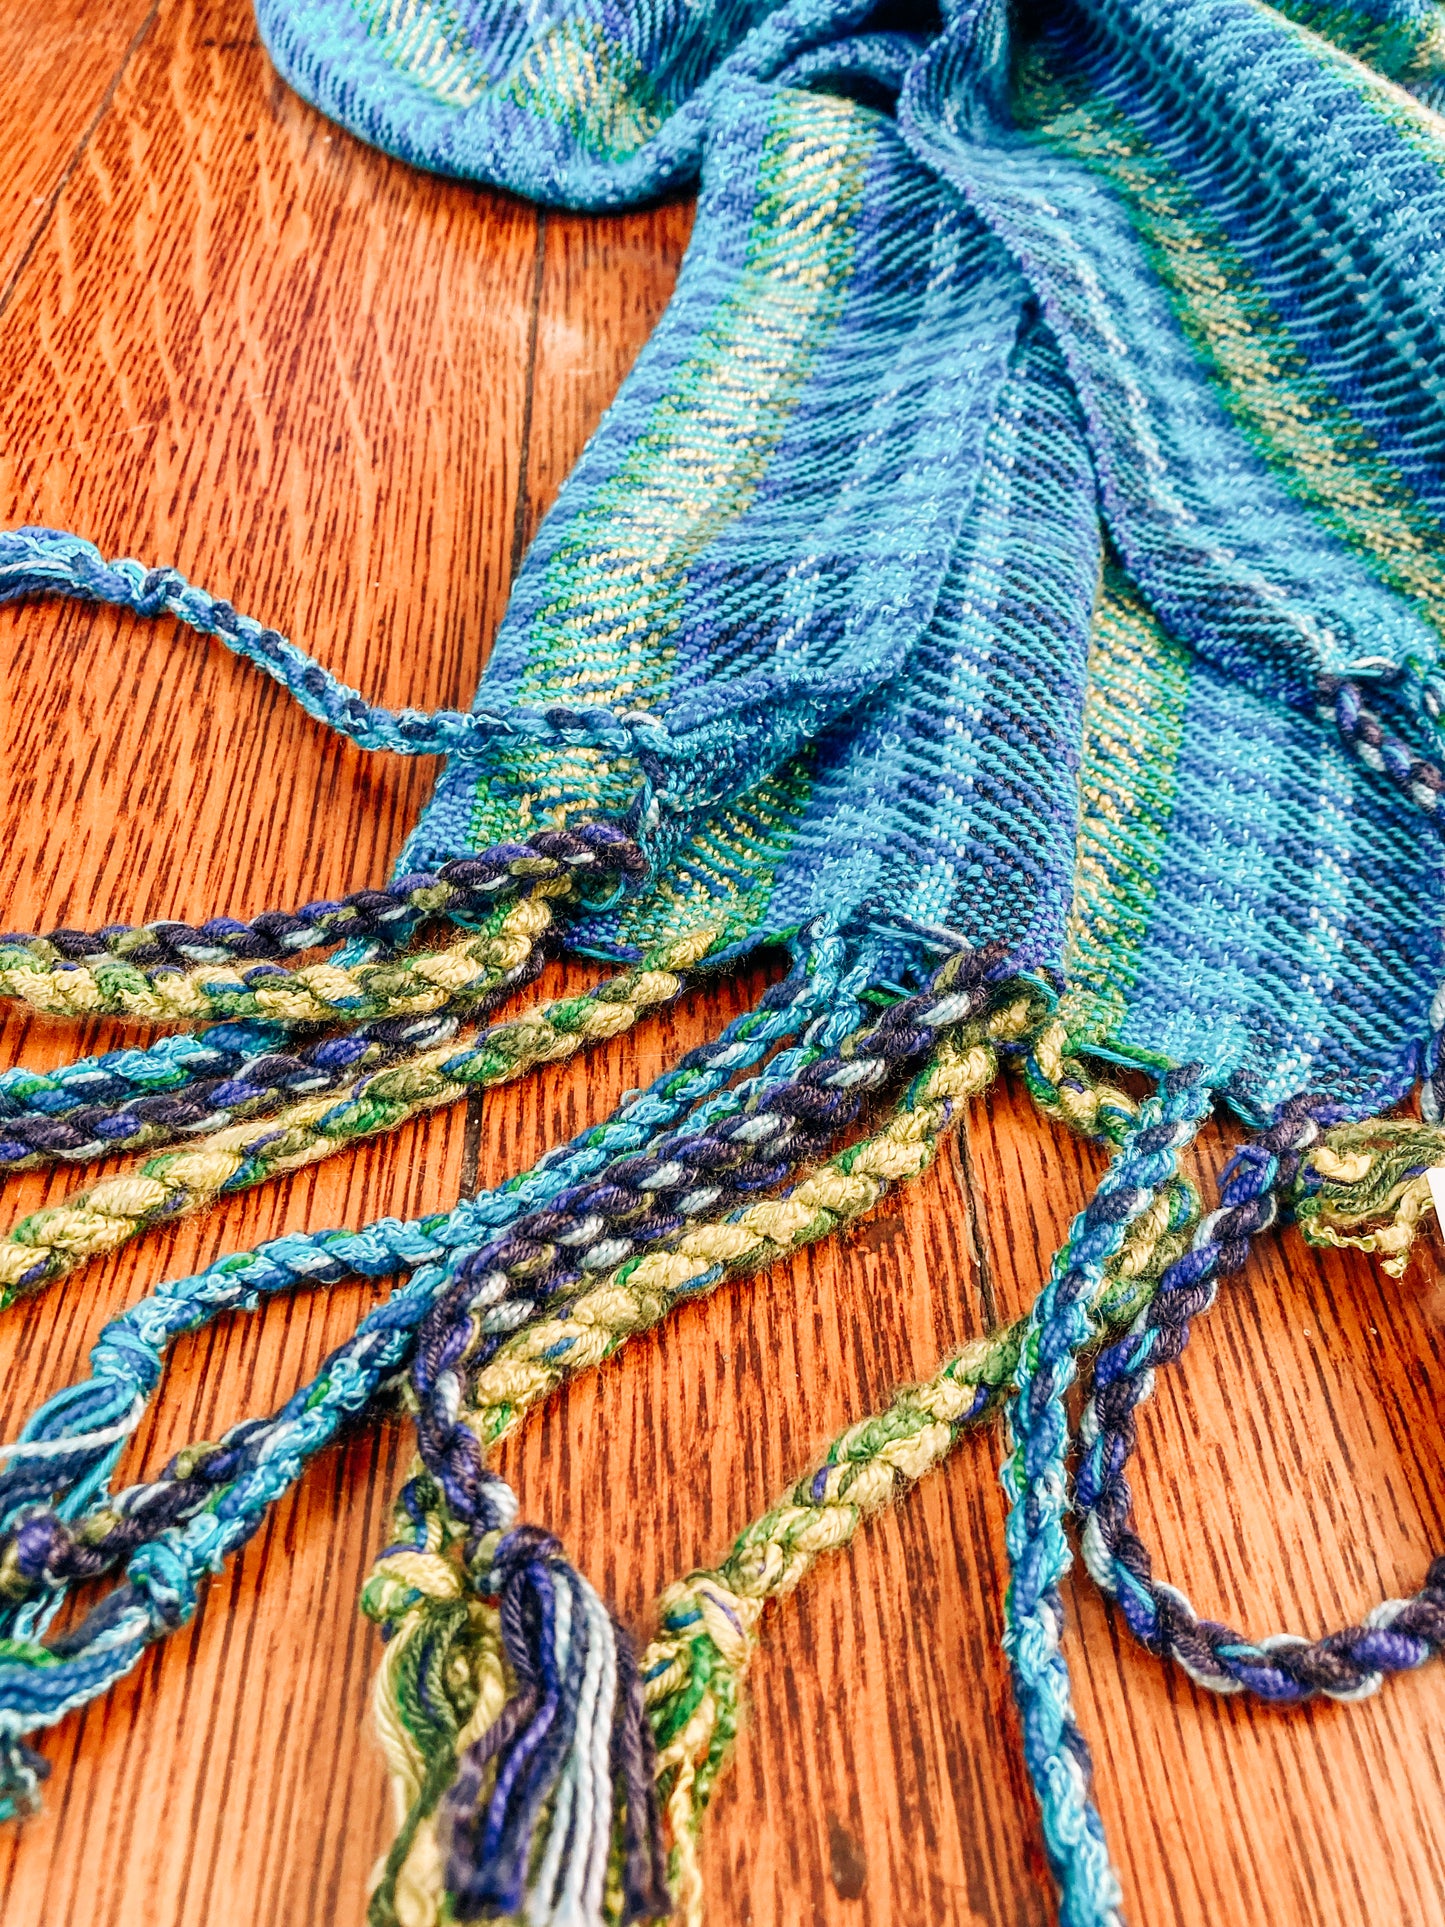 Turquoise/Royal Blue Scarf